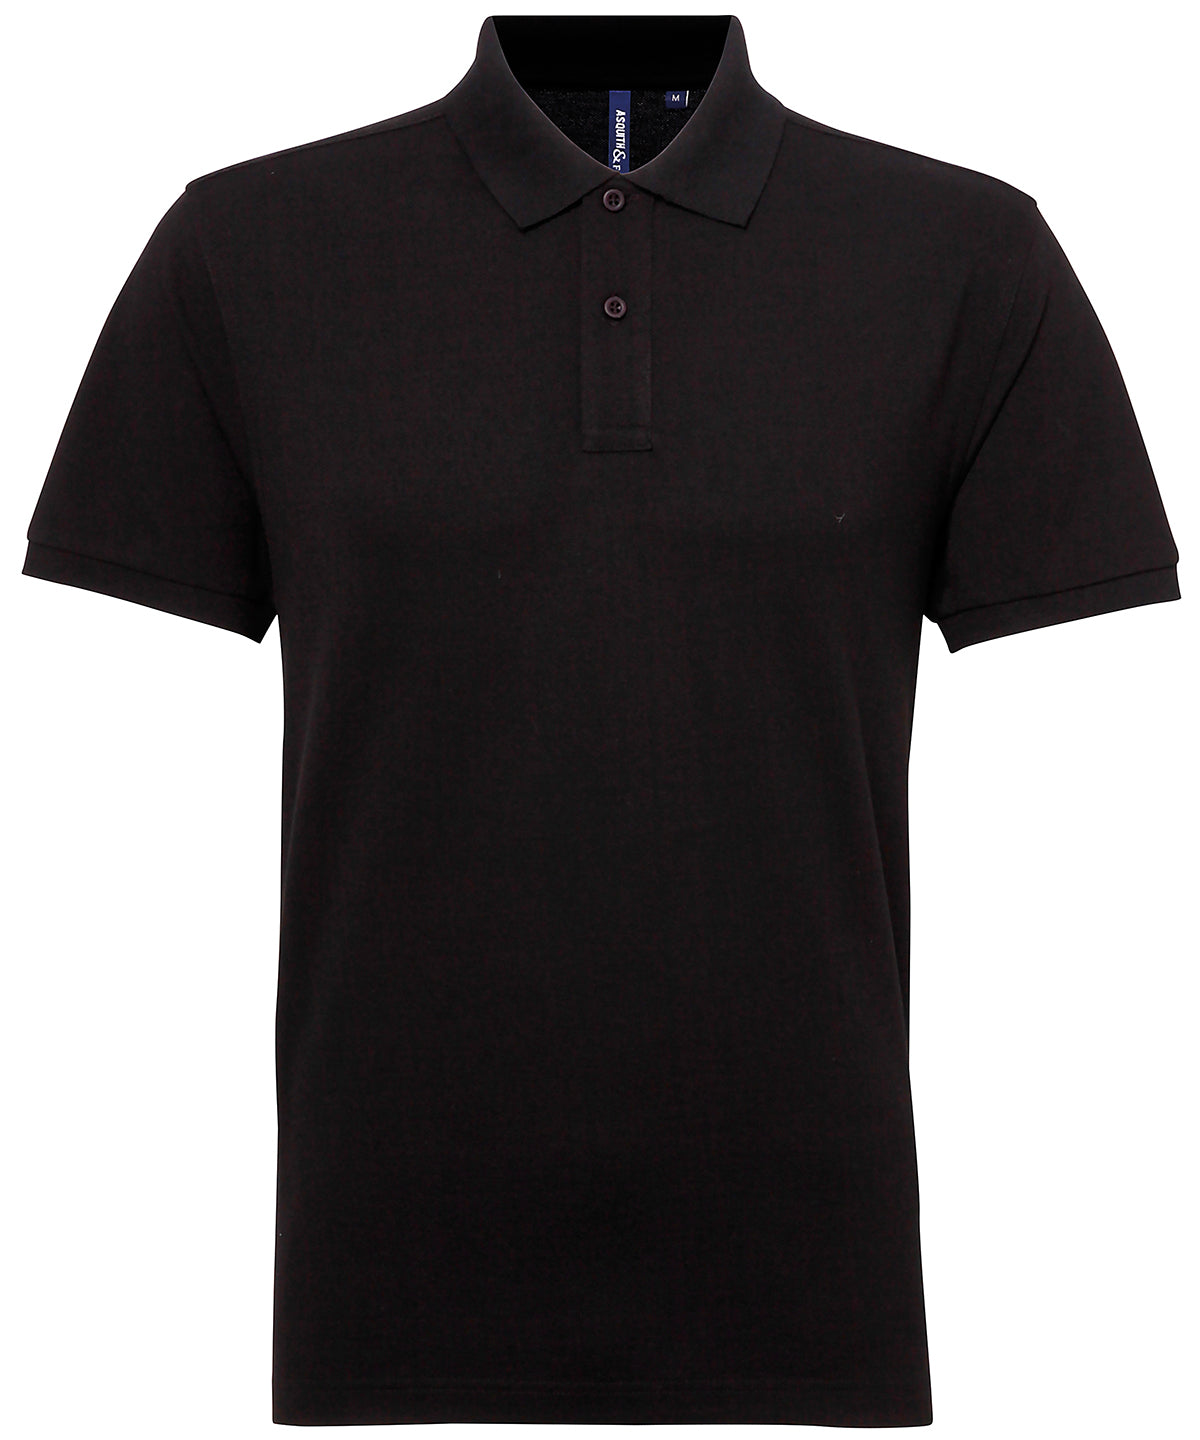 Personalised Polo Shirts - Dark Purple Asquith & Fox Men’s polycotton blend polo